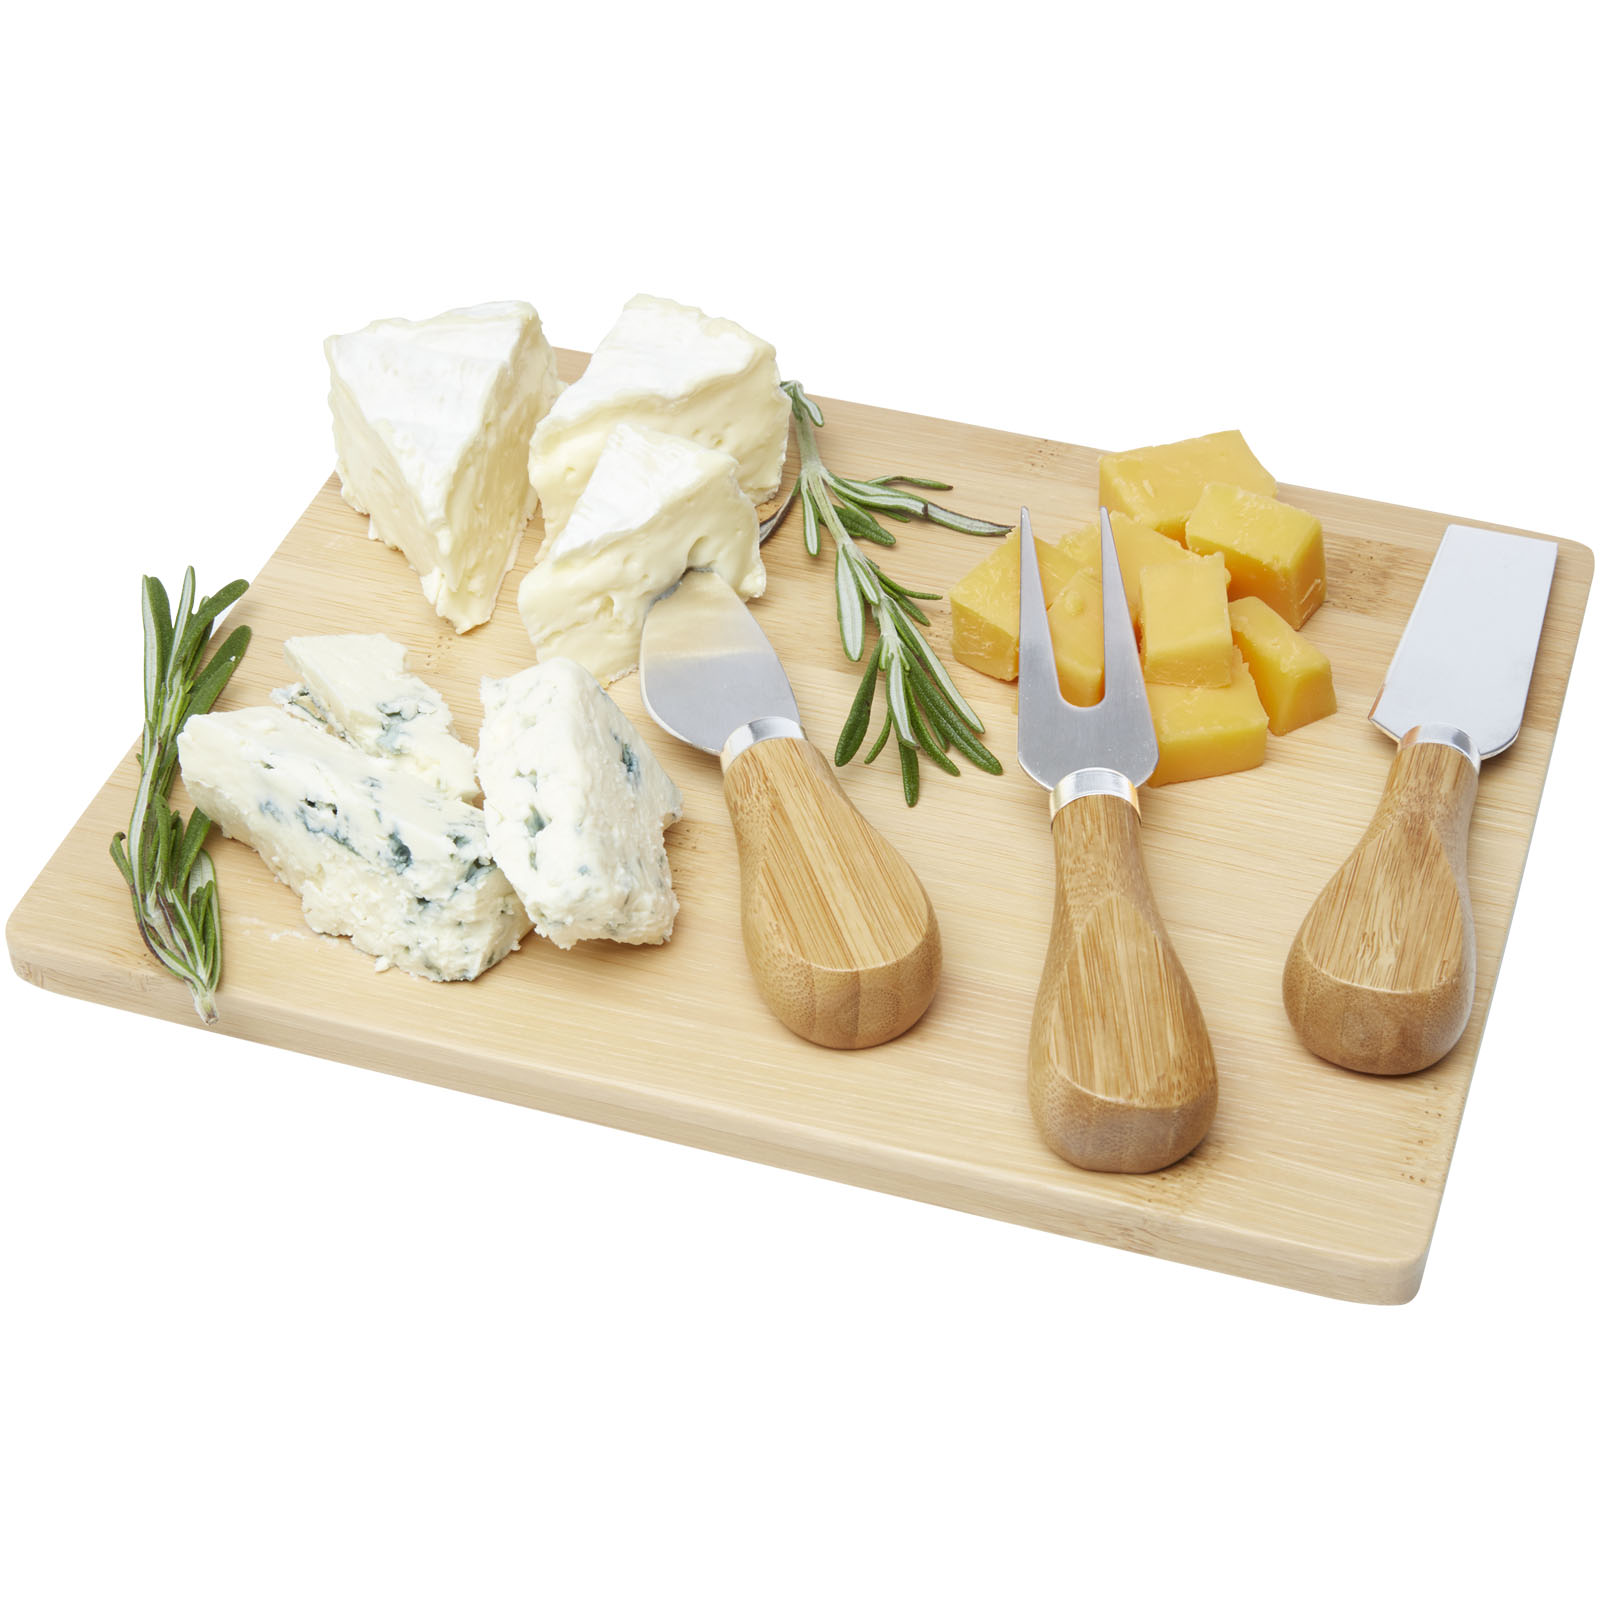 Advertising Serving Sets - Ement bamboo cheese board and tools - 2